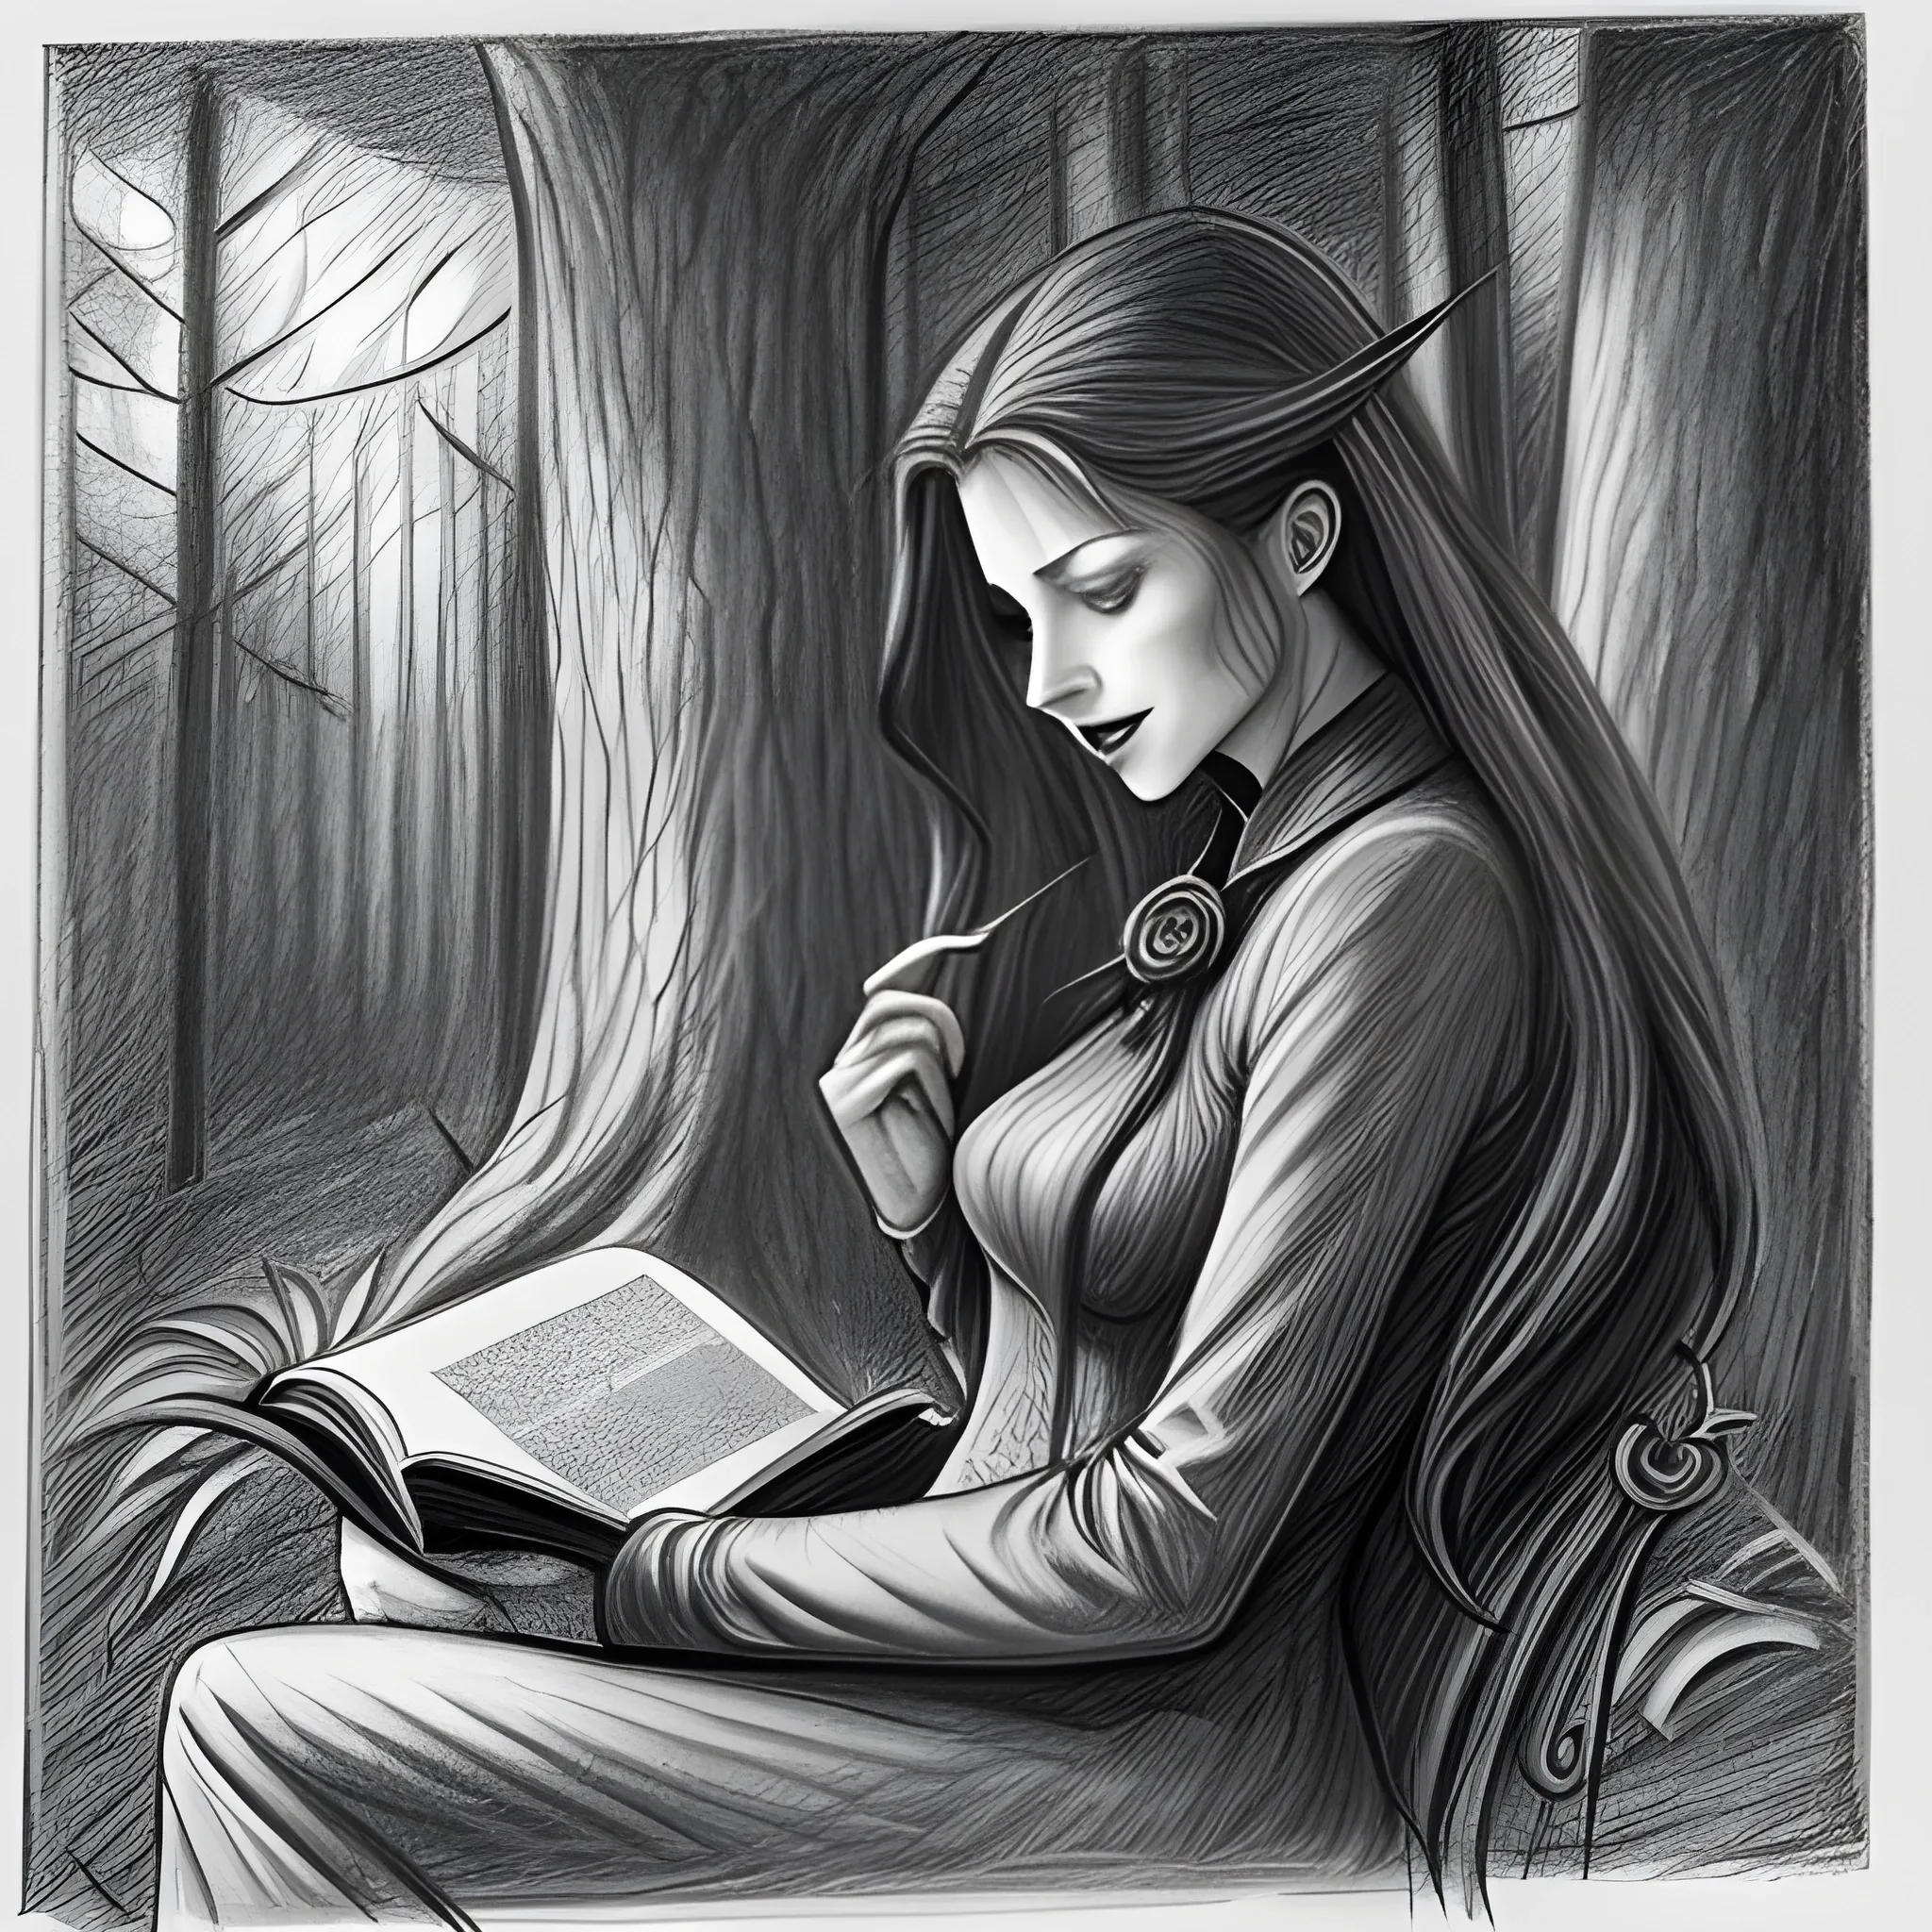 pencil sketch of a vampire woman reading a book in a forest